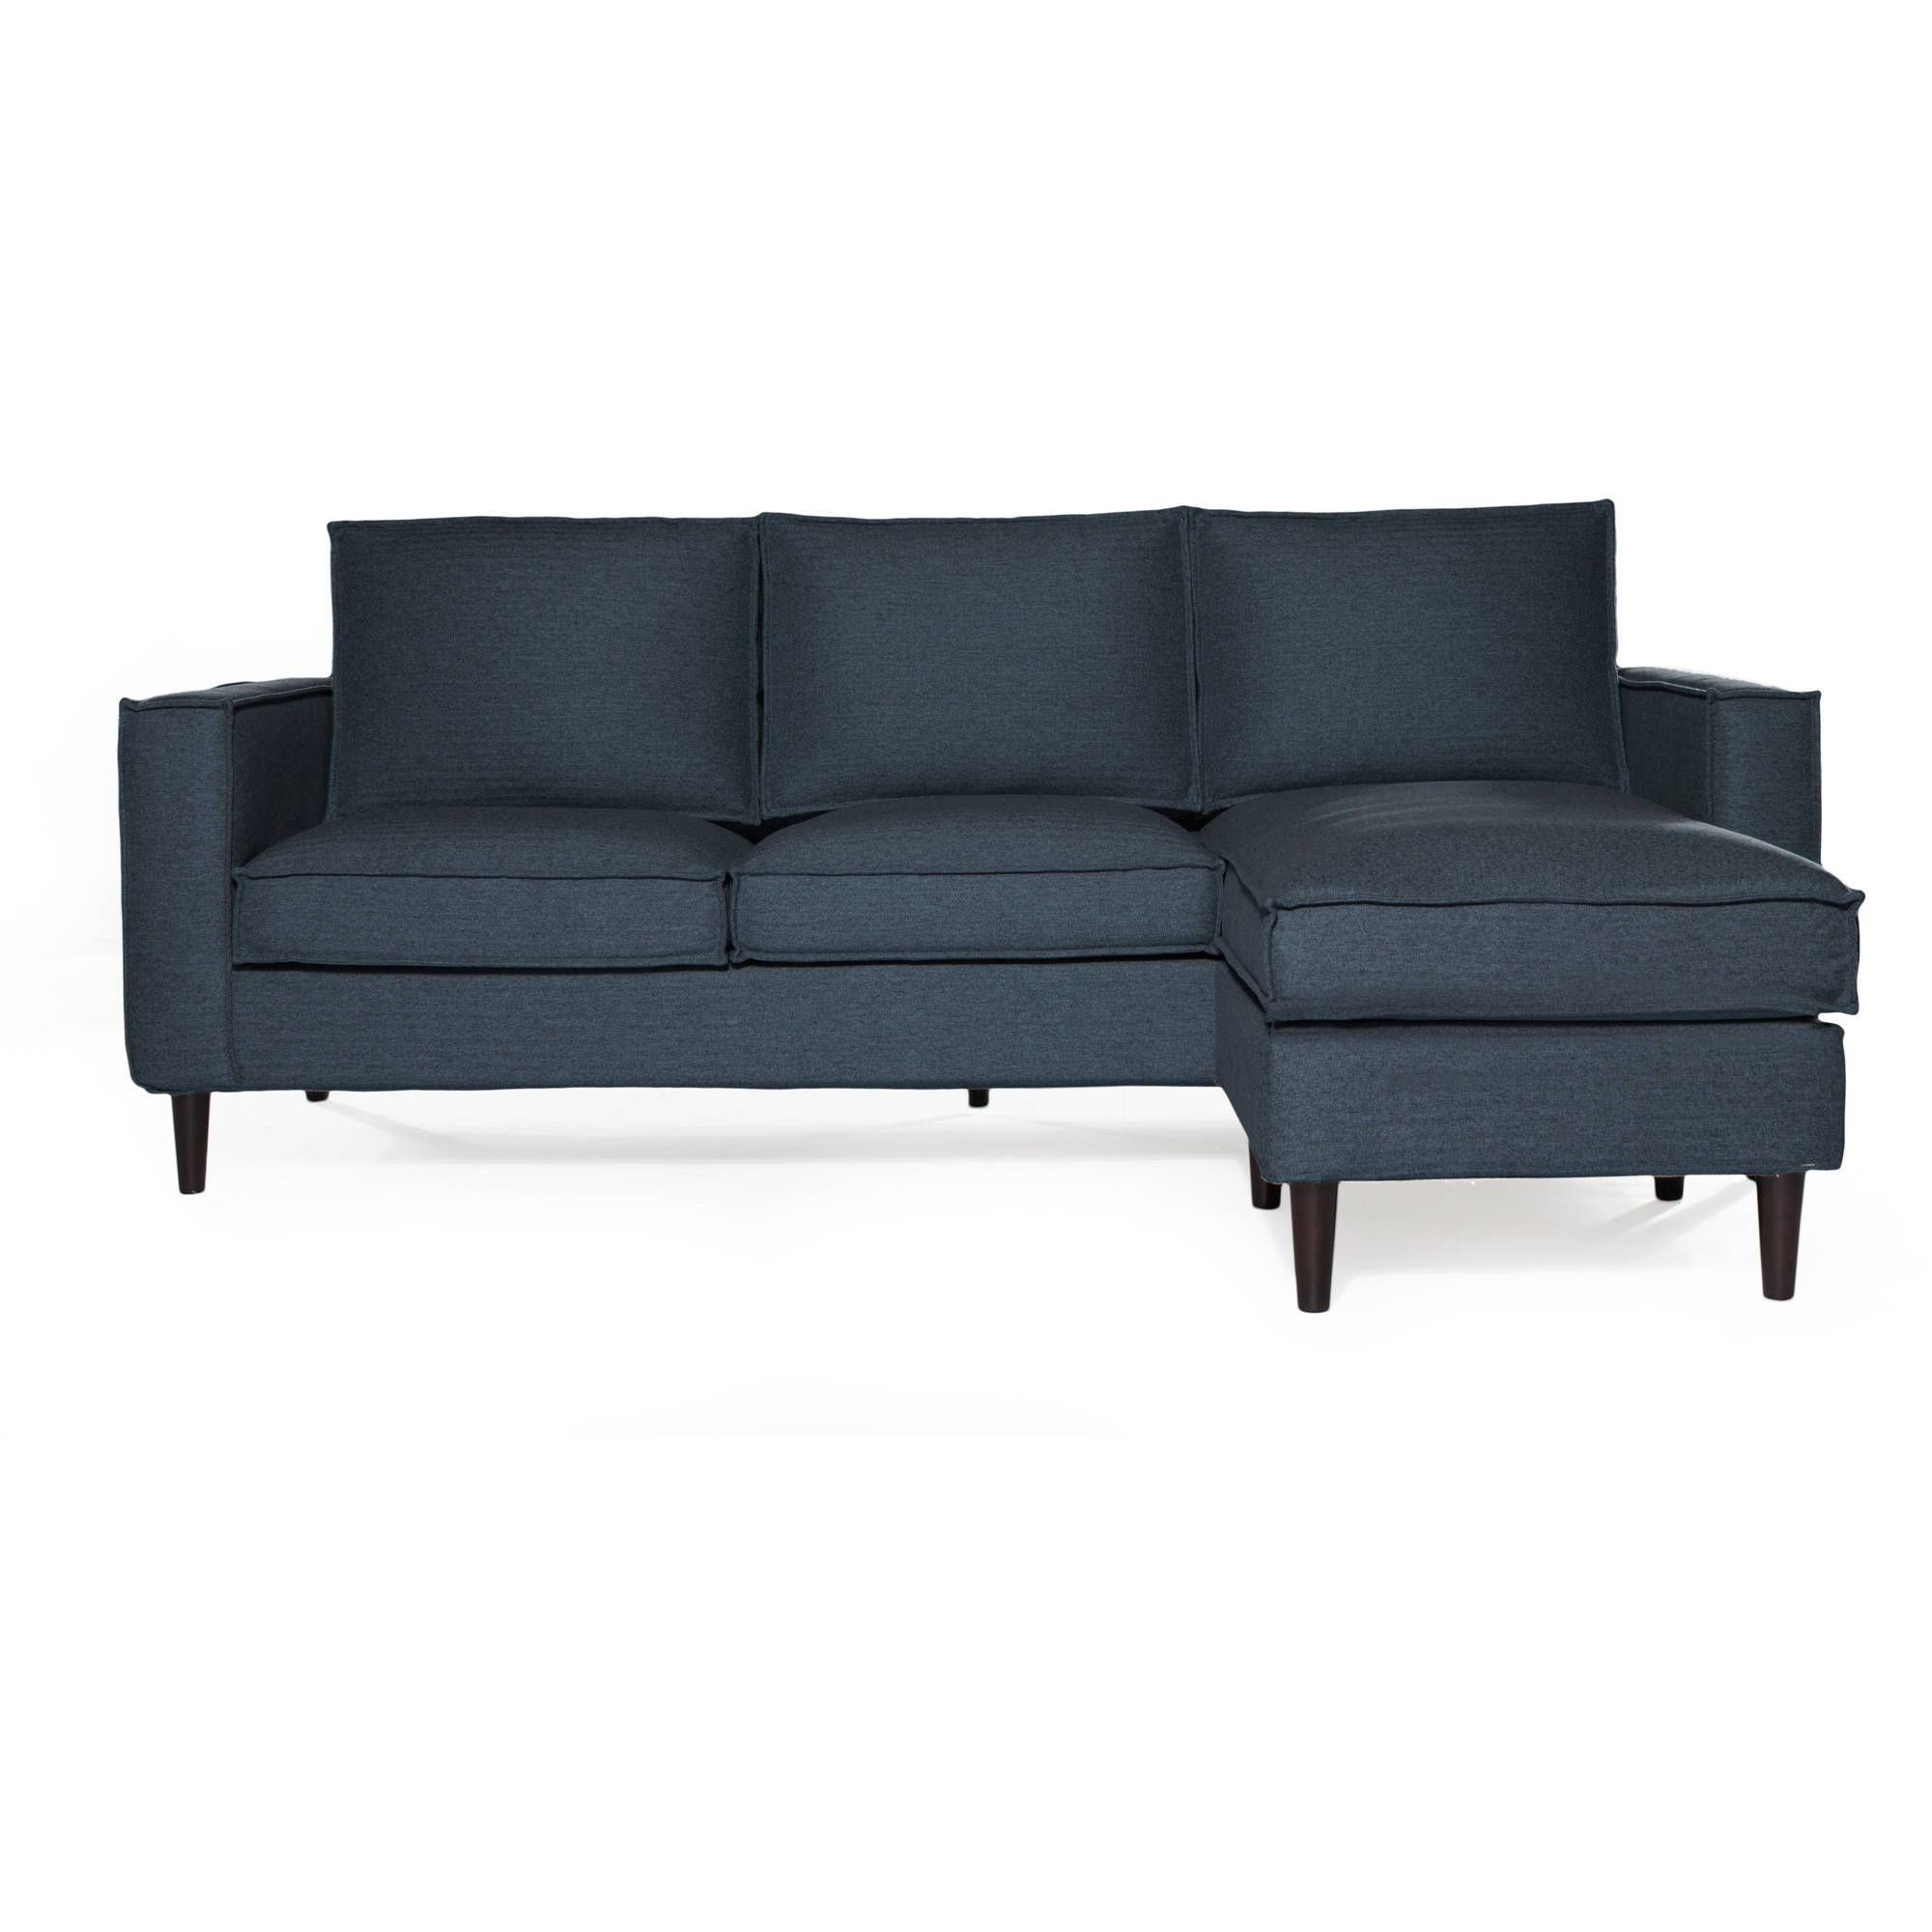 Sofas & Couches – Walmart Throughout Very Small Sofas (View 12 of 25)